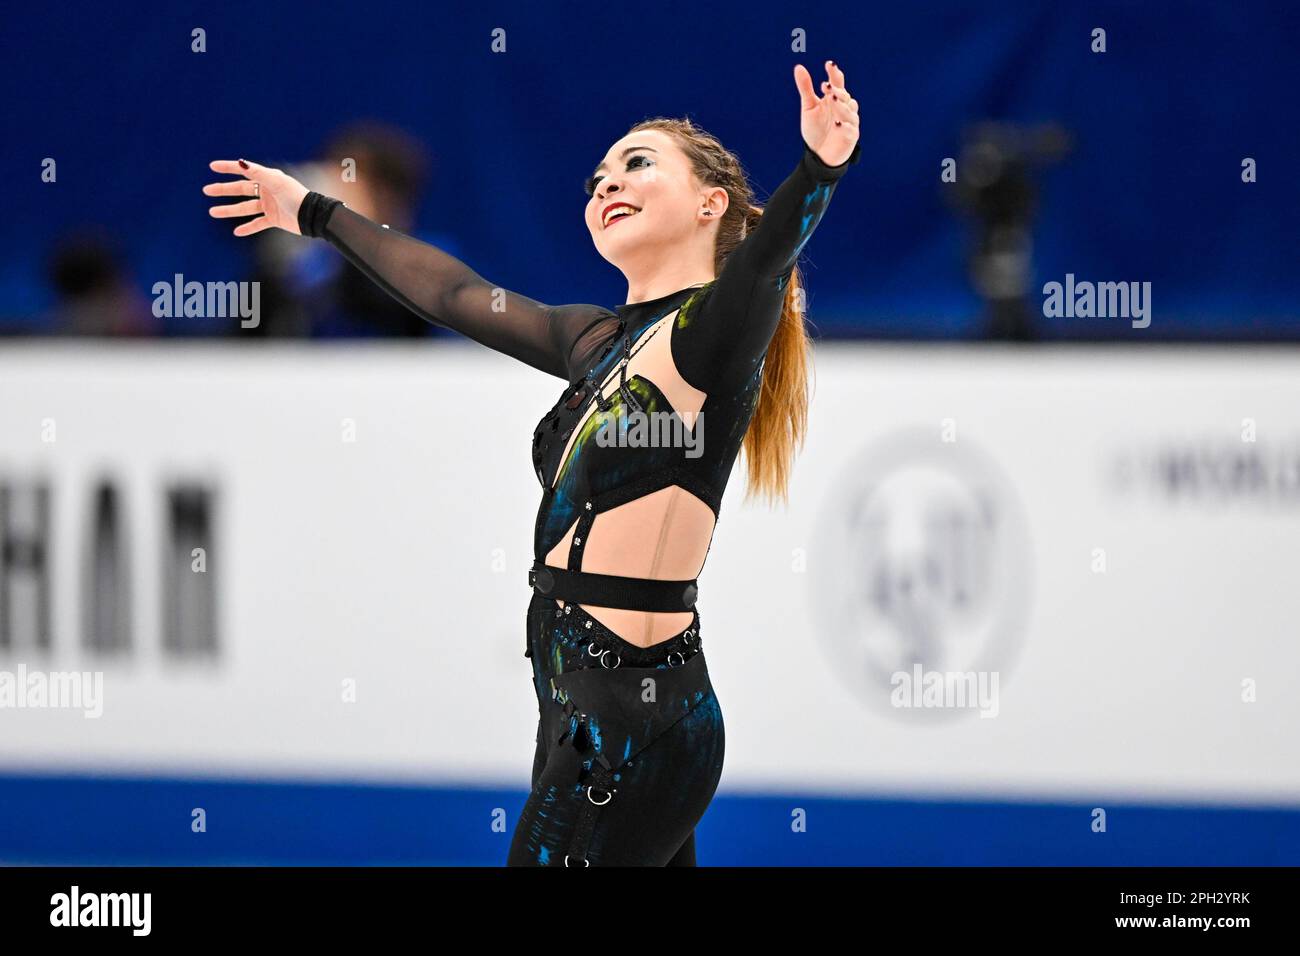 SAITAMA, JAPAN - MARCH 25: Allison Reed of Lithuania competes in the Ice Dance Free Dance during the ISU World Figure Skating Championships 2023 at Saitama Super Arena on March 25, 2023 in Saitama, Japan (Photo by Pablo Morano/BSR Agency) Stock Photo